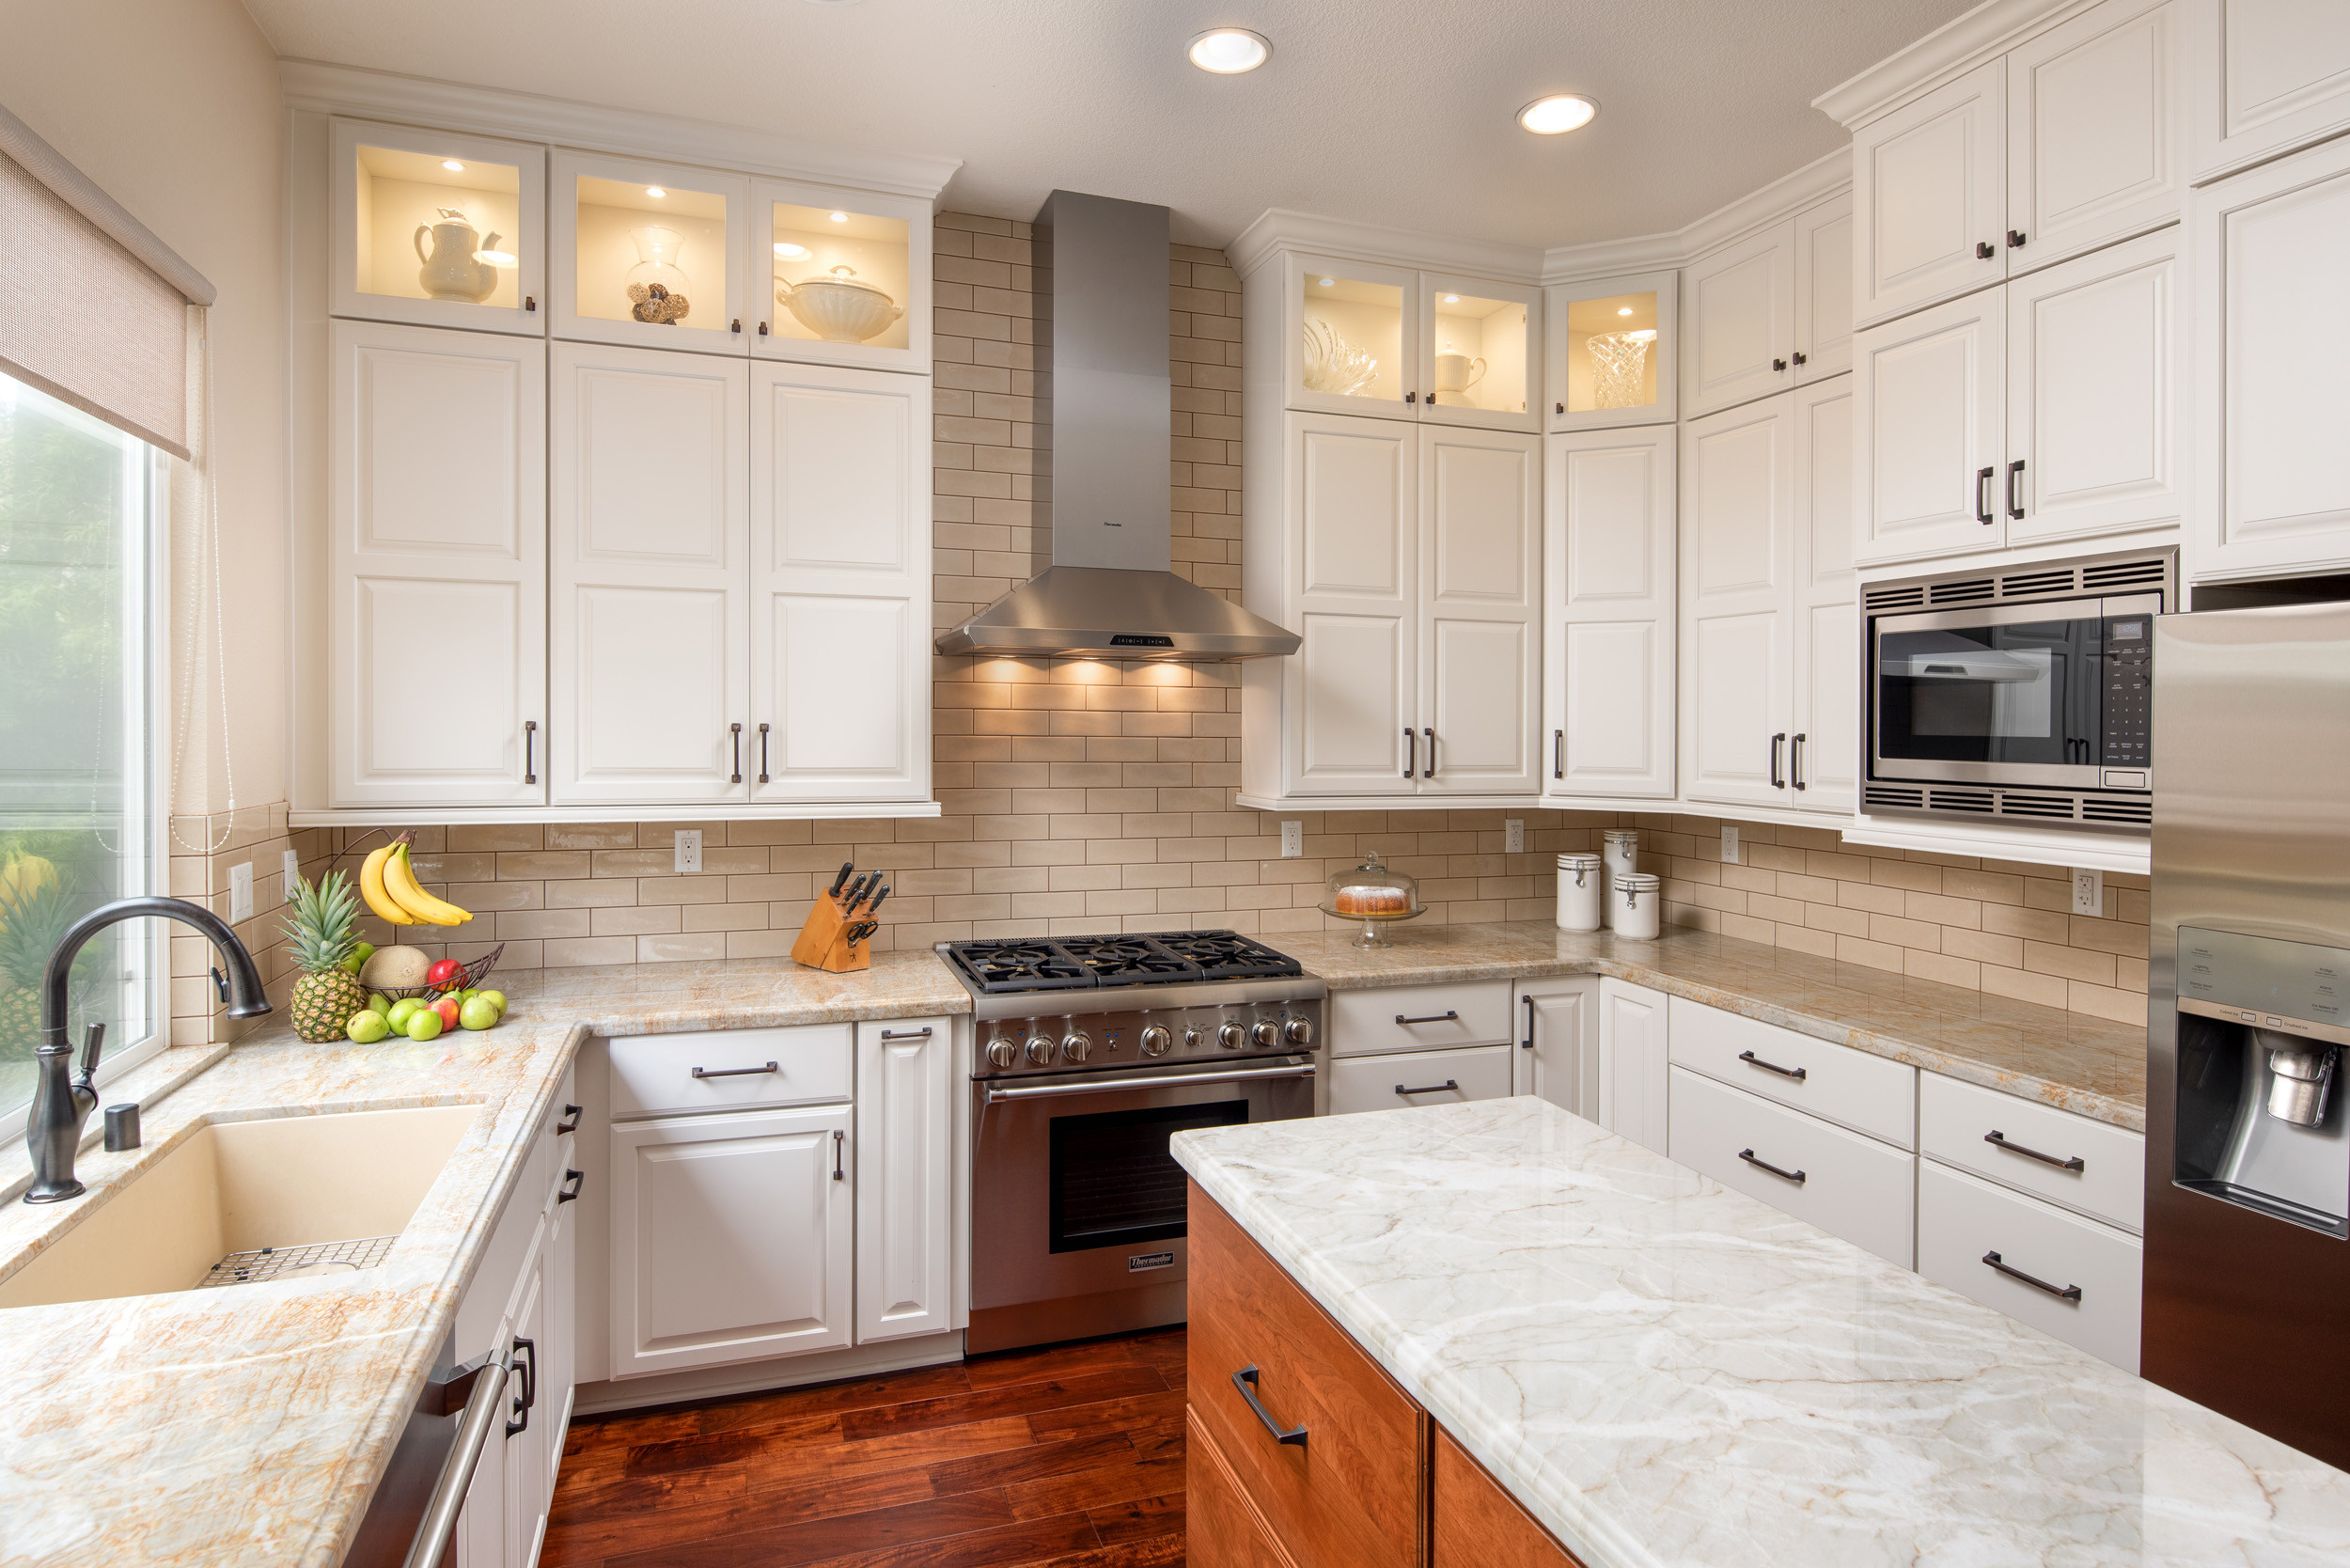 Kitchen Remodel Pictures
 Home Remodeling Ideas & Gallery